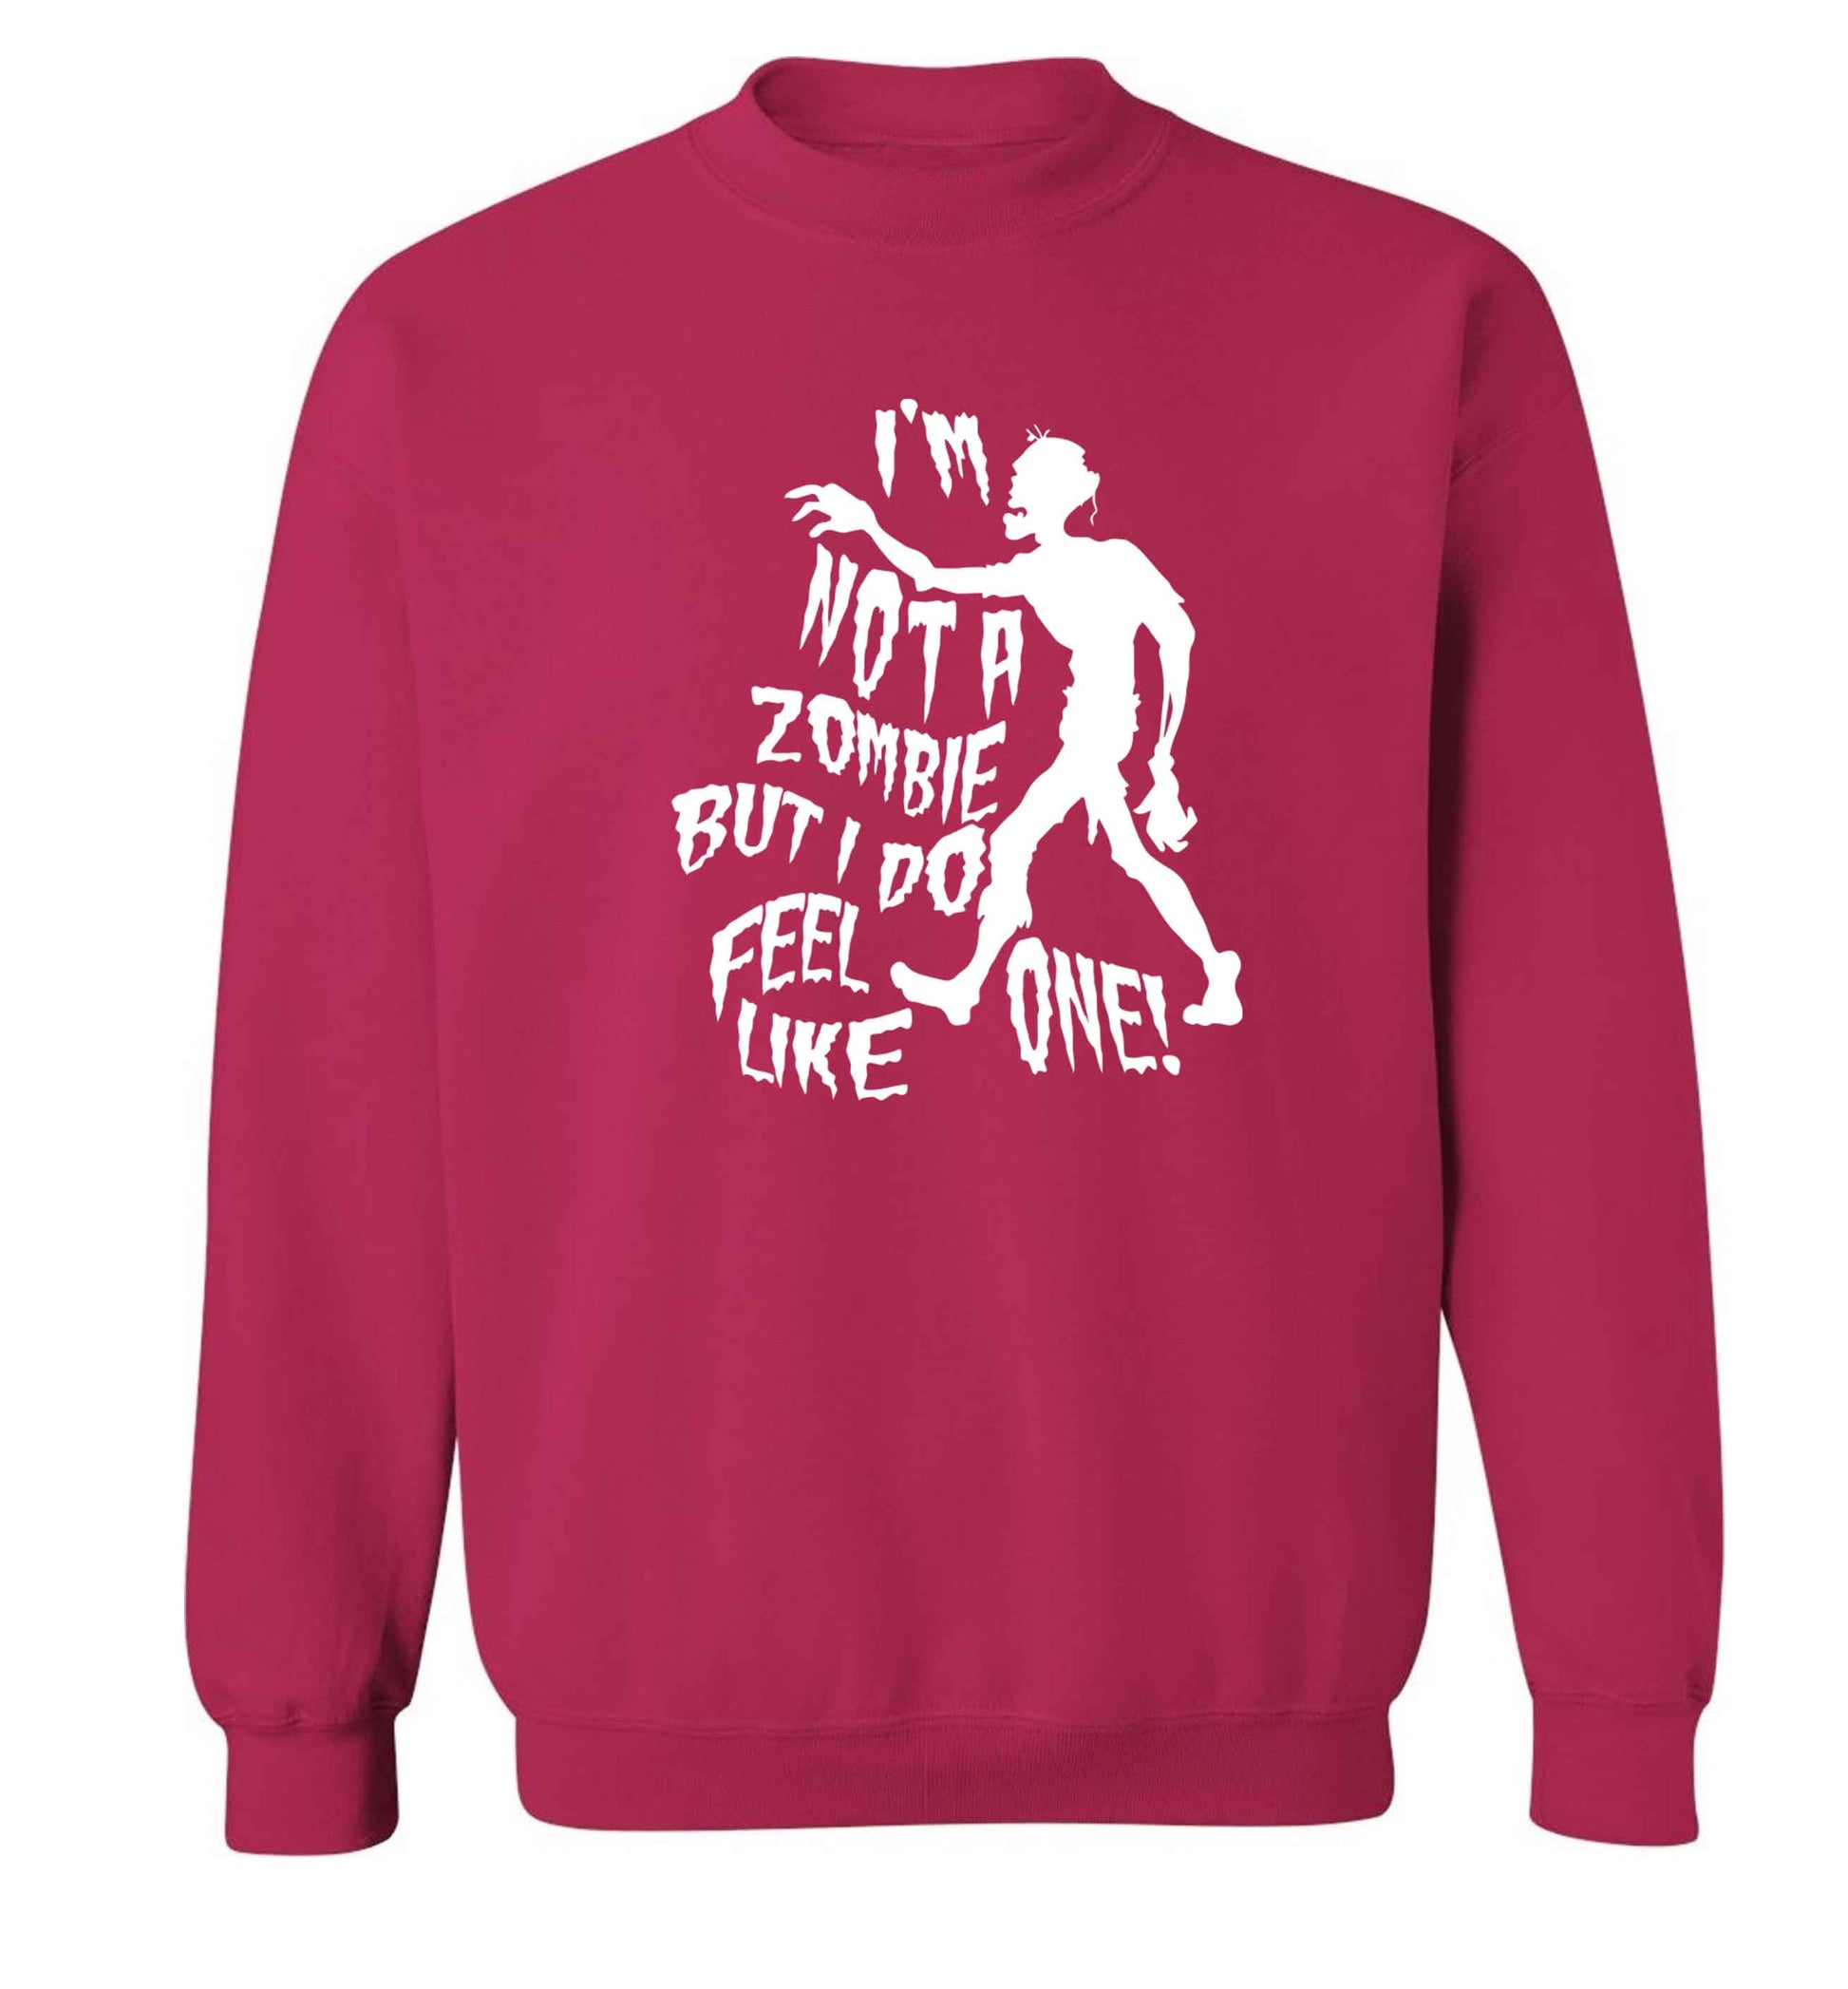 I'm not a zombie but I do feel like one! Adult's unisex pink Sweater 2XL